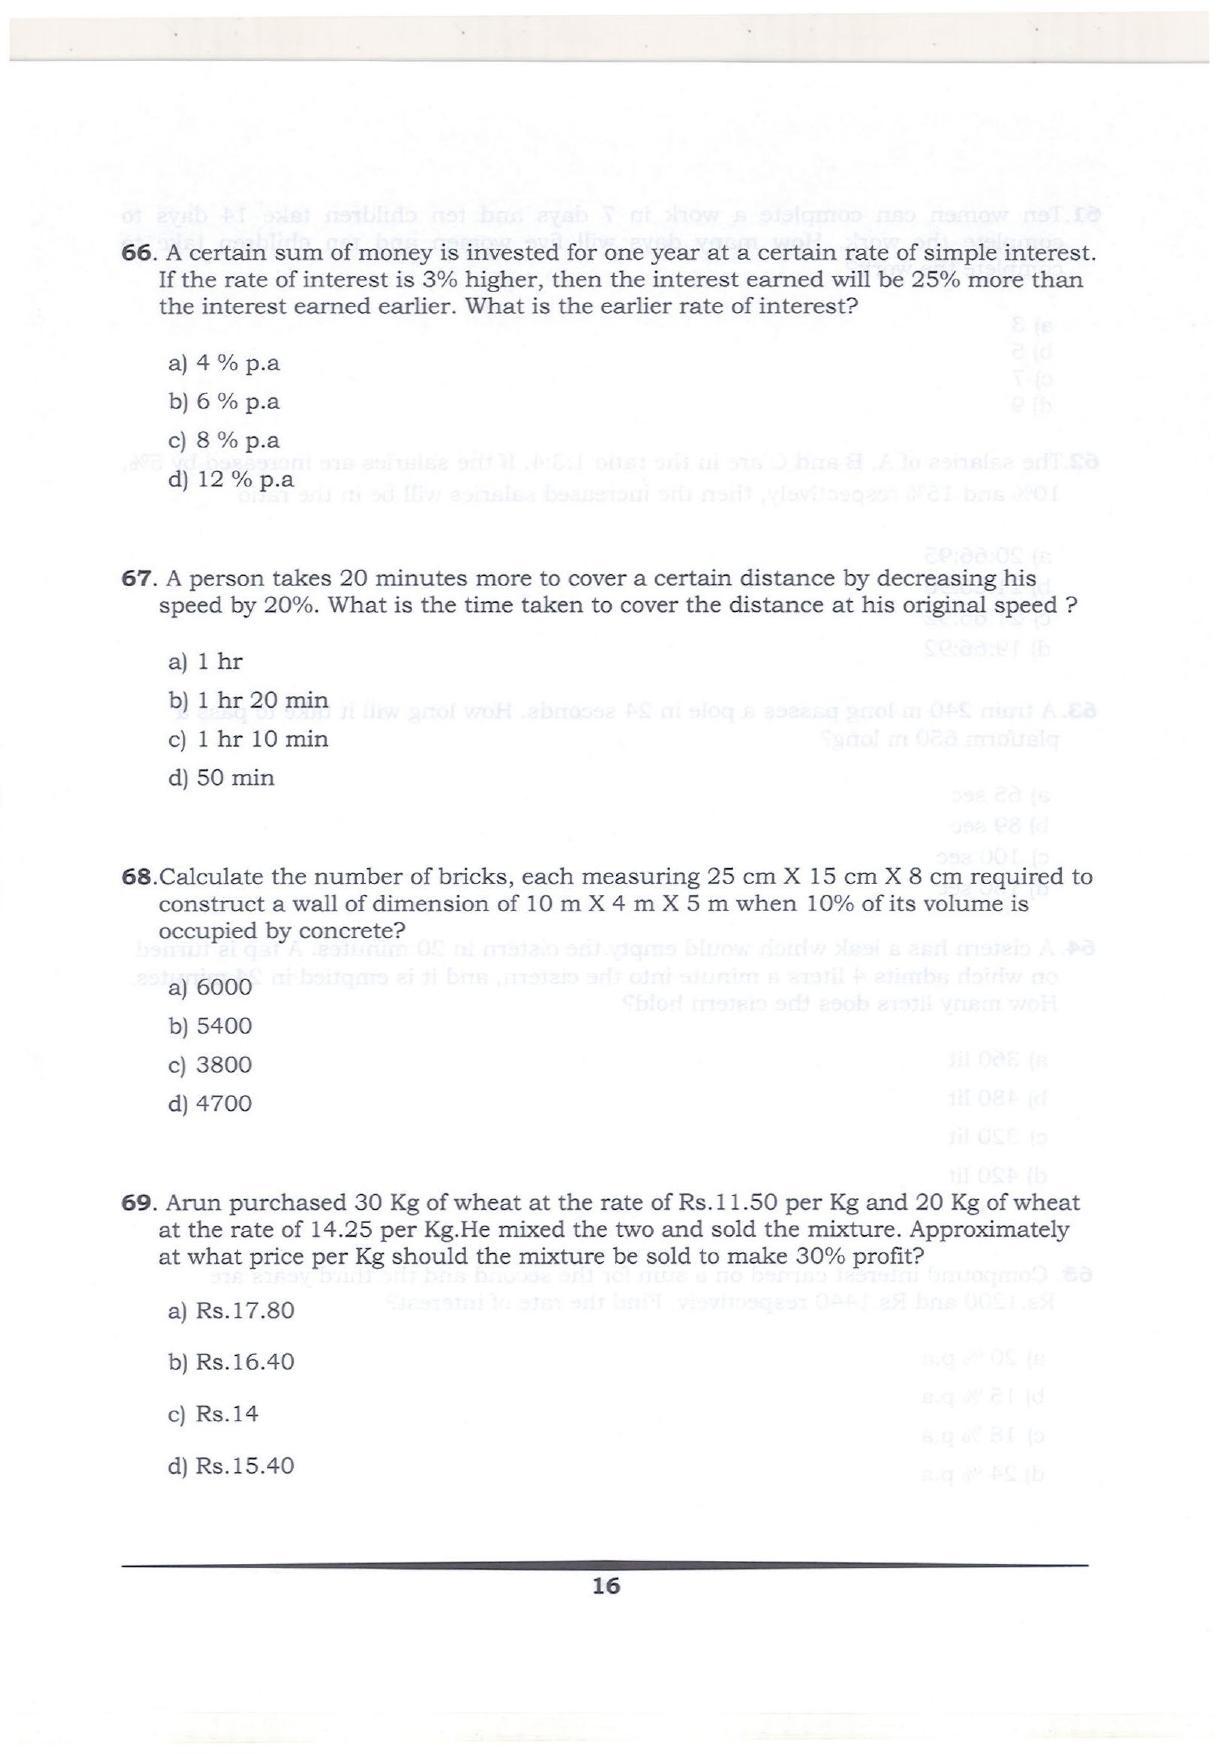 KMAT Question Papers - February 2018 - Page 15